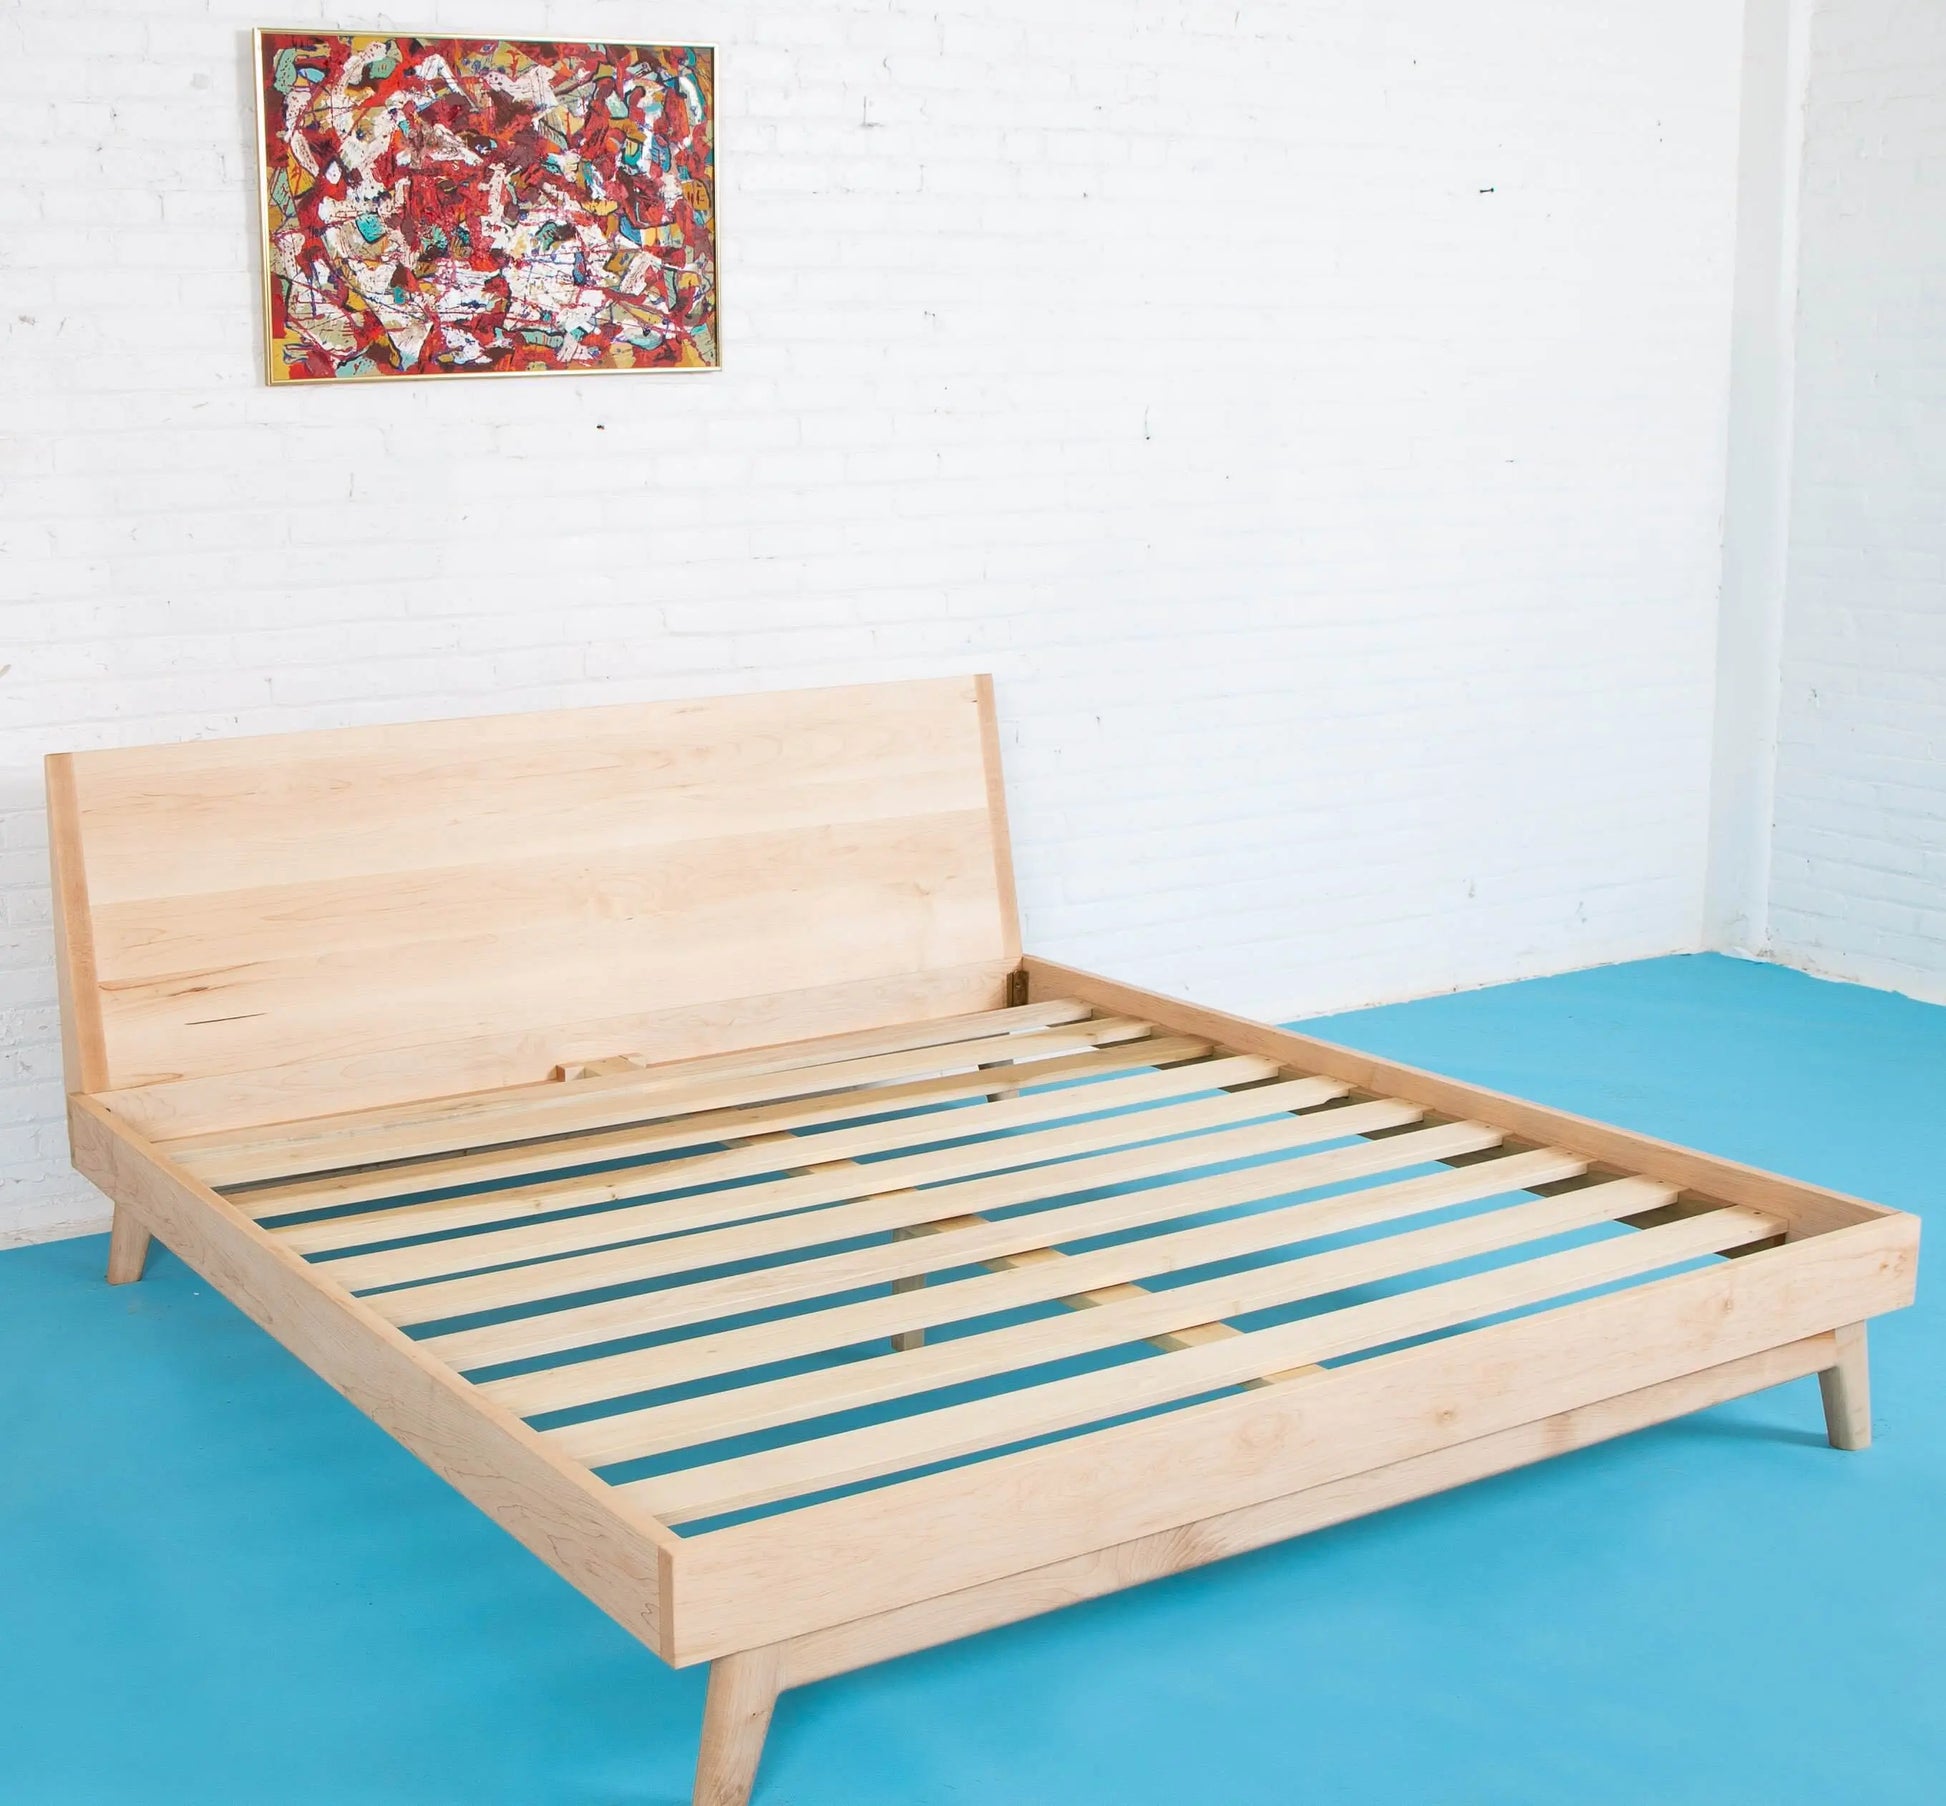 Walnut Elegance Redefined: The Bosco Handcrafted Bed